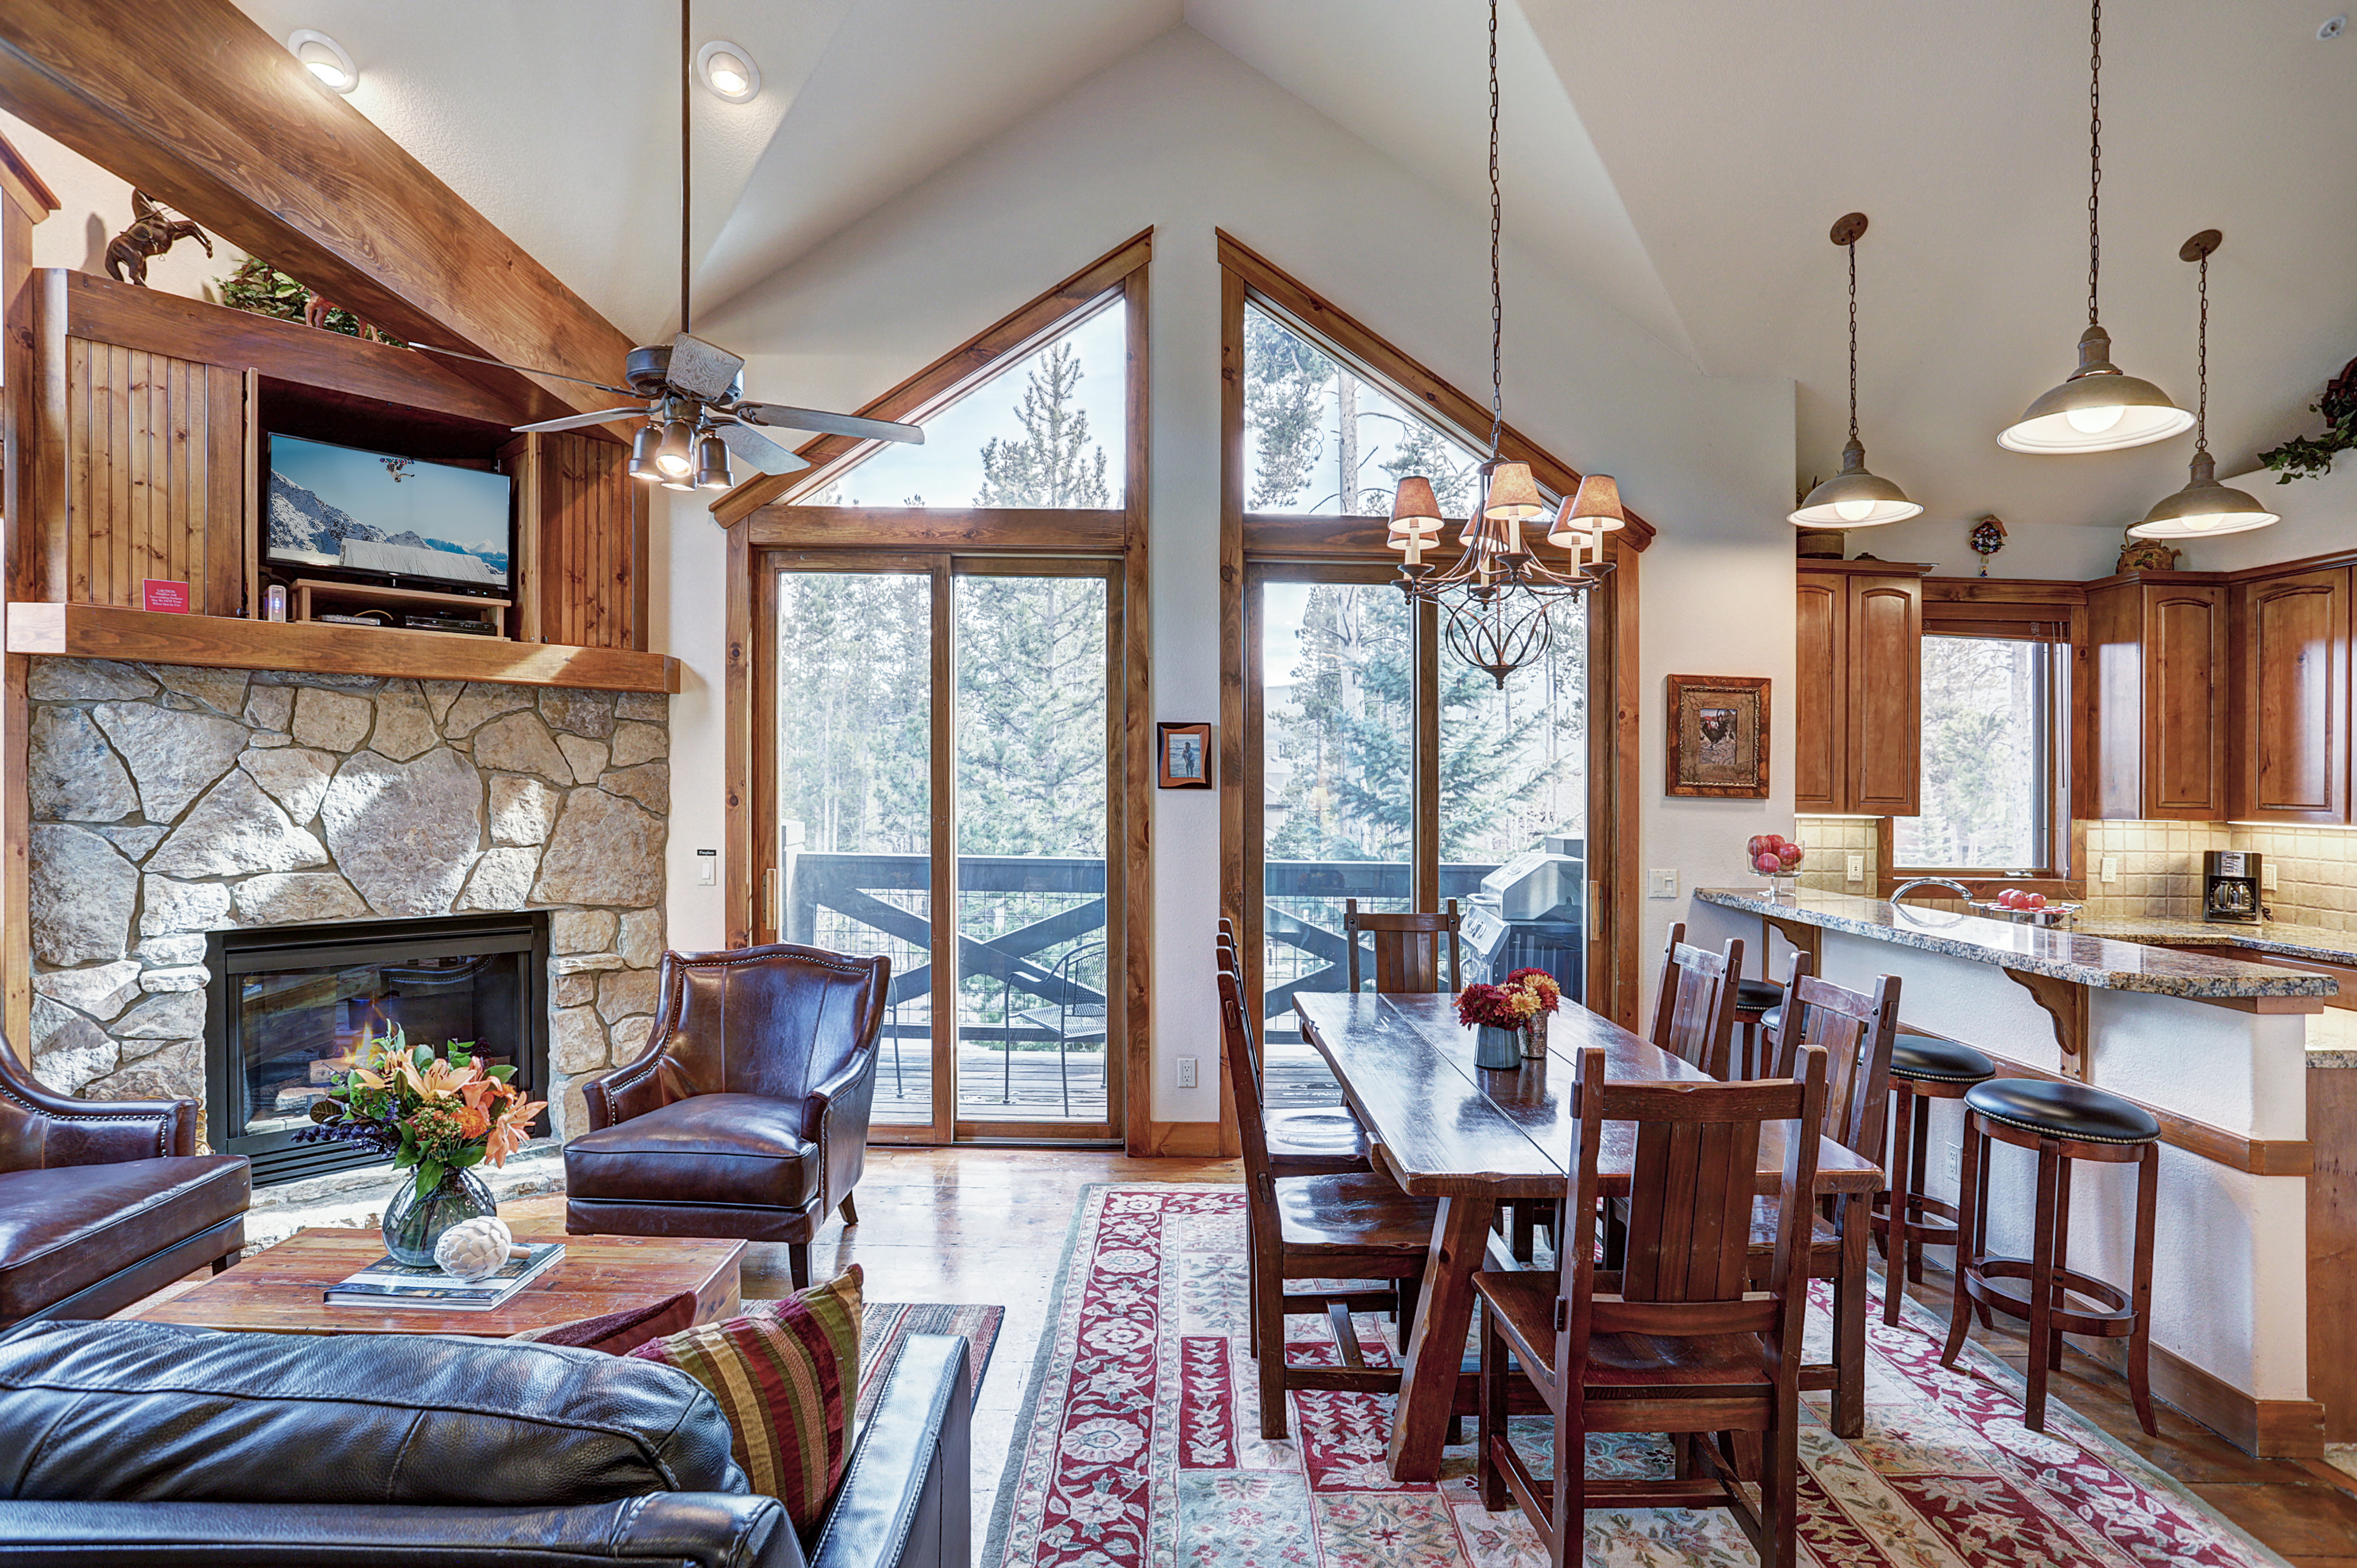 Have a wonderful meal in the open concept dining area with ample space - Amber Sky Breckenridge Vacation Rental